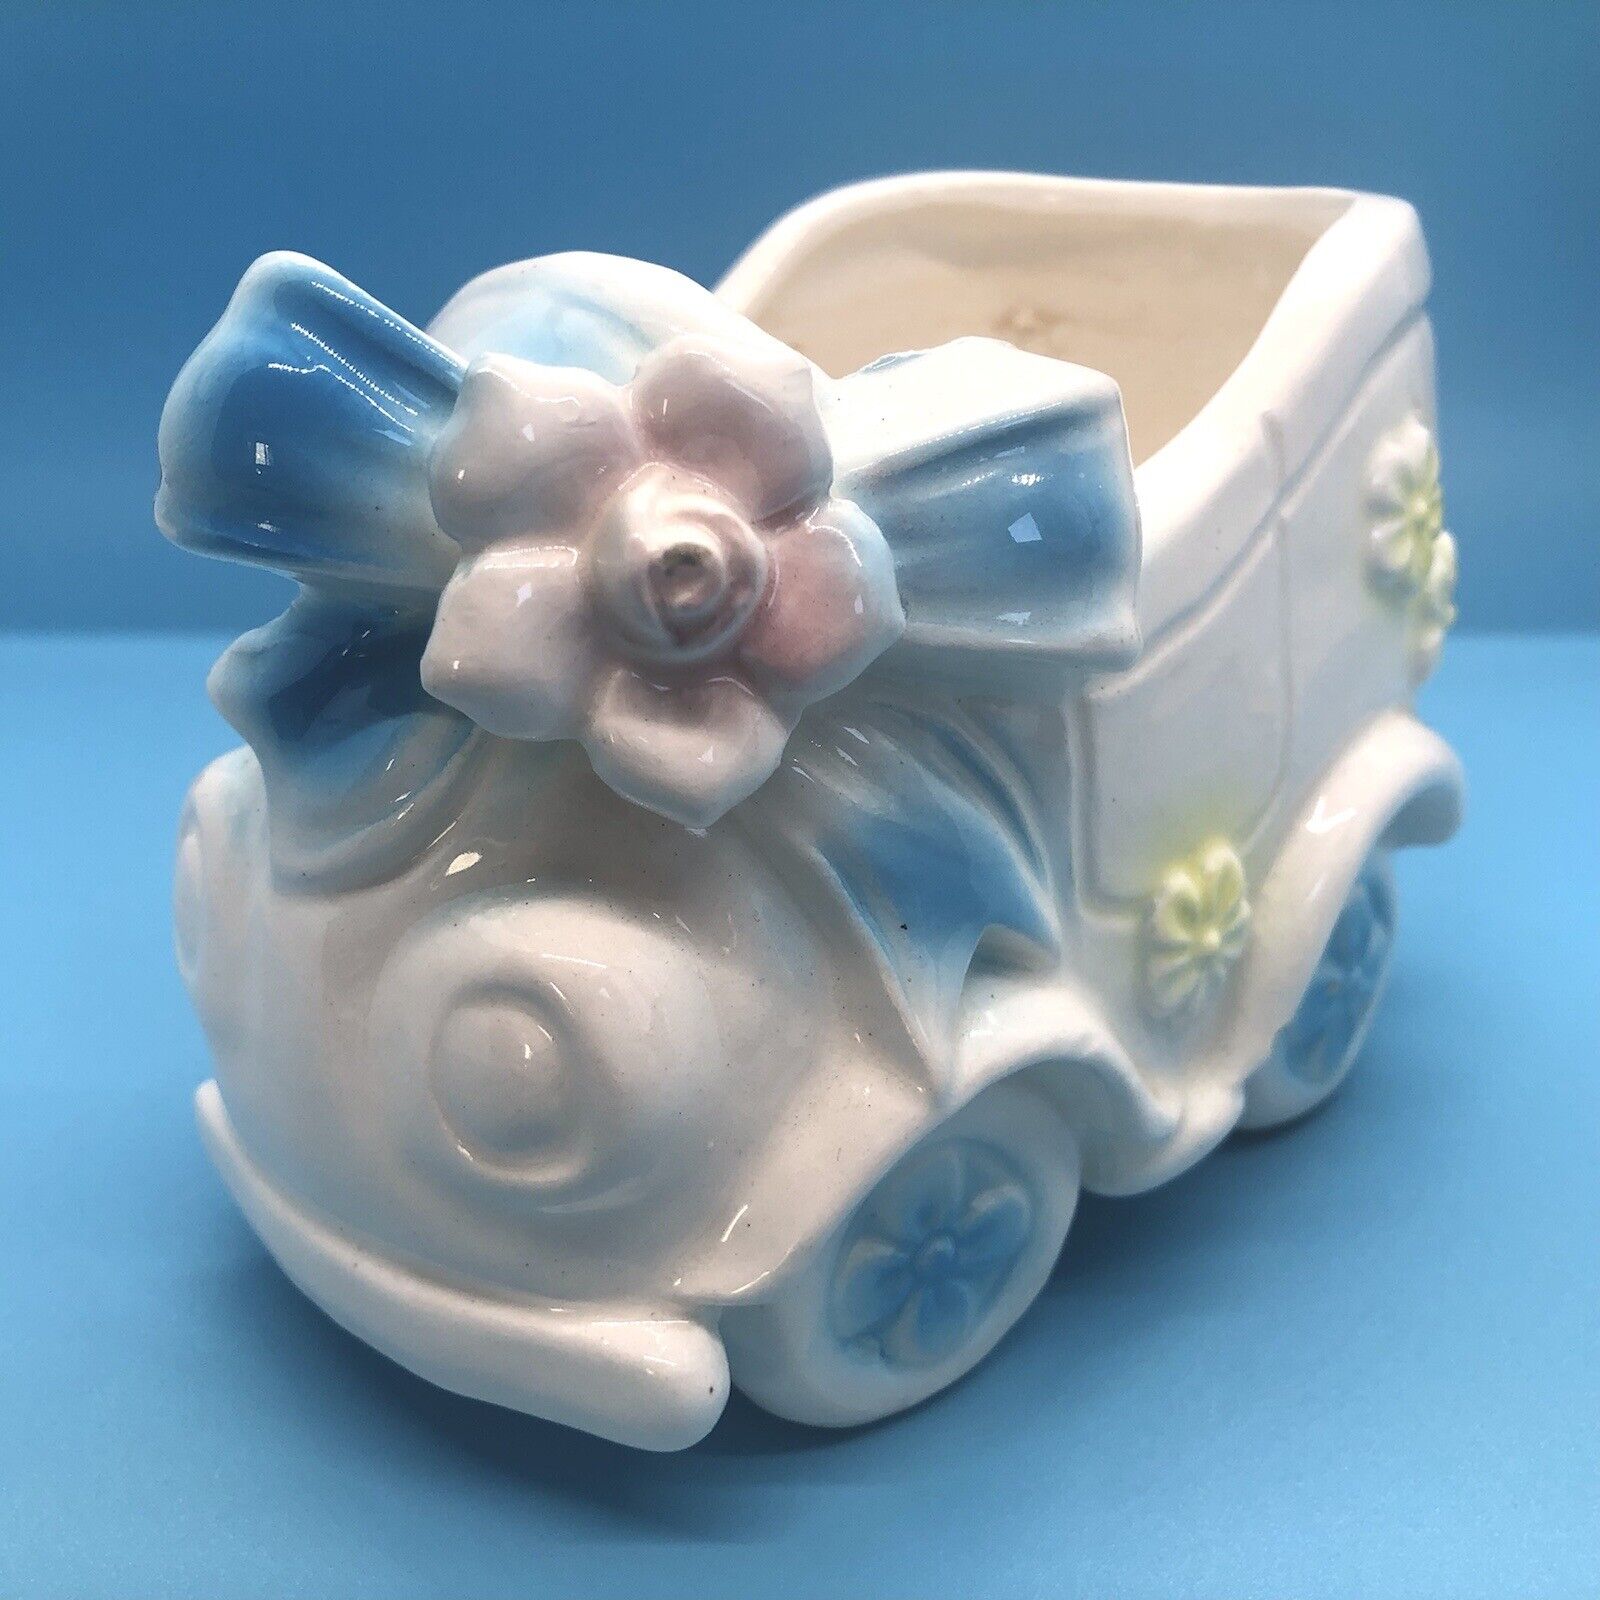 Vintage Inarco Ceramic Baby Carriage Nursery Decor Gift -Made In Japan